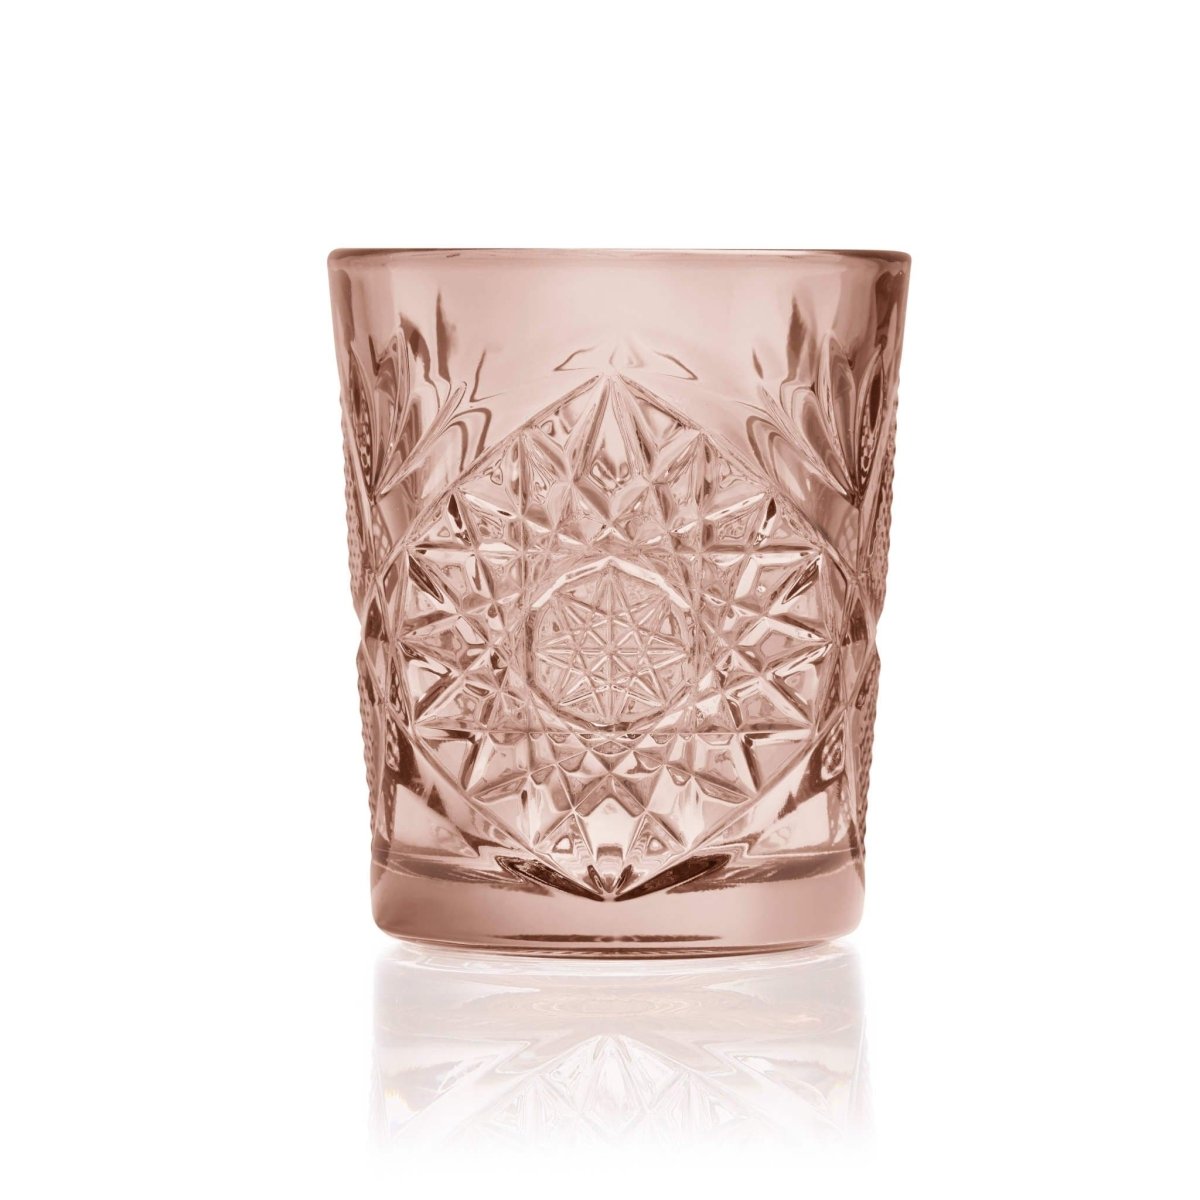 https://cdn.shopify.com/s/files/1/0275/1876/3088/products/hobstar-double-old-fashioned-glasses-12oz-rose-set-of-4-981910_1445x.jpg?v=1701567468